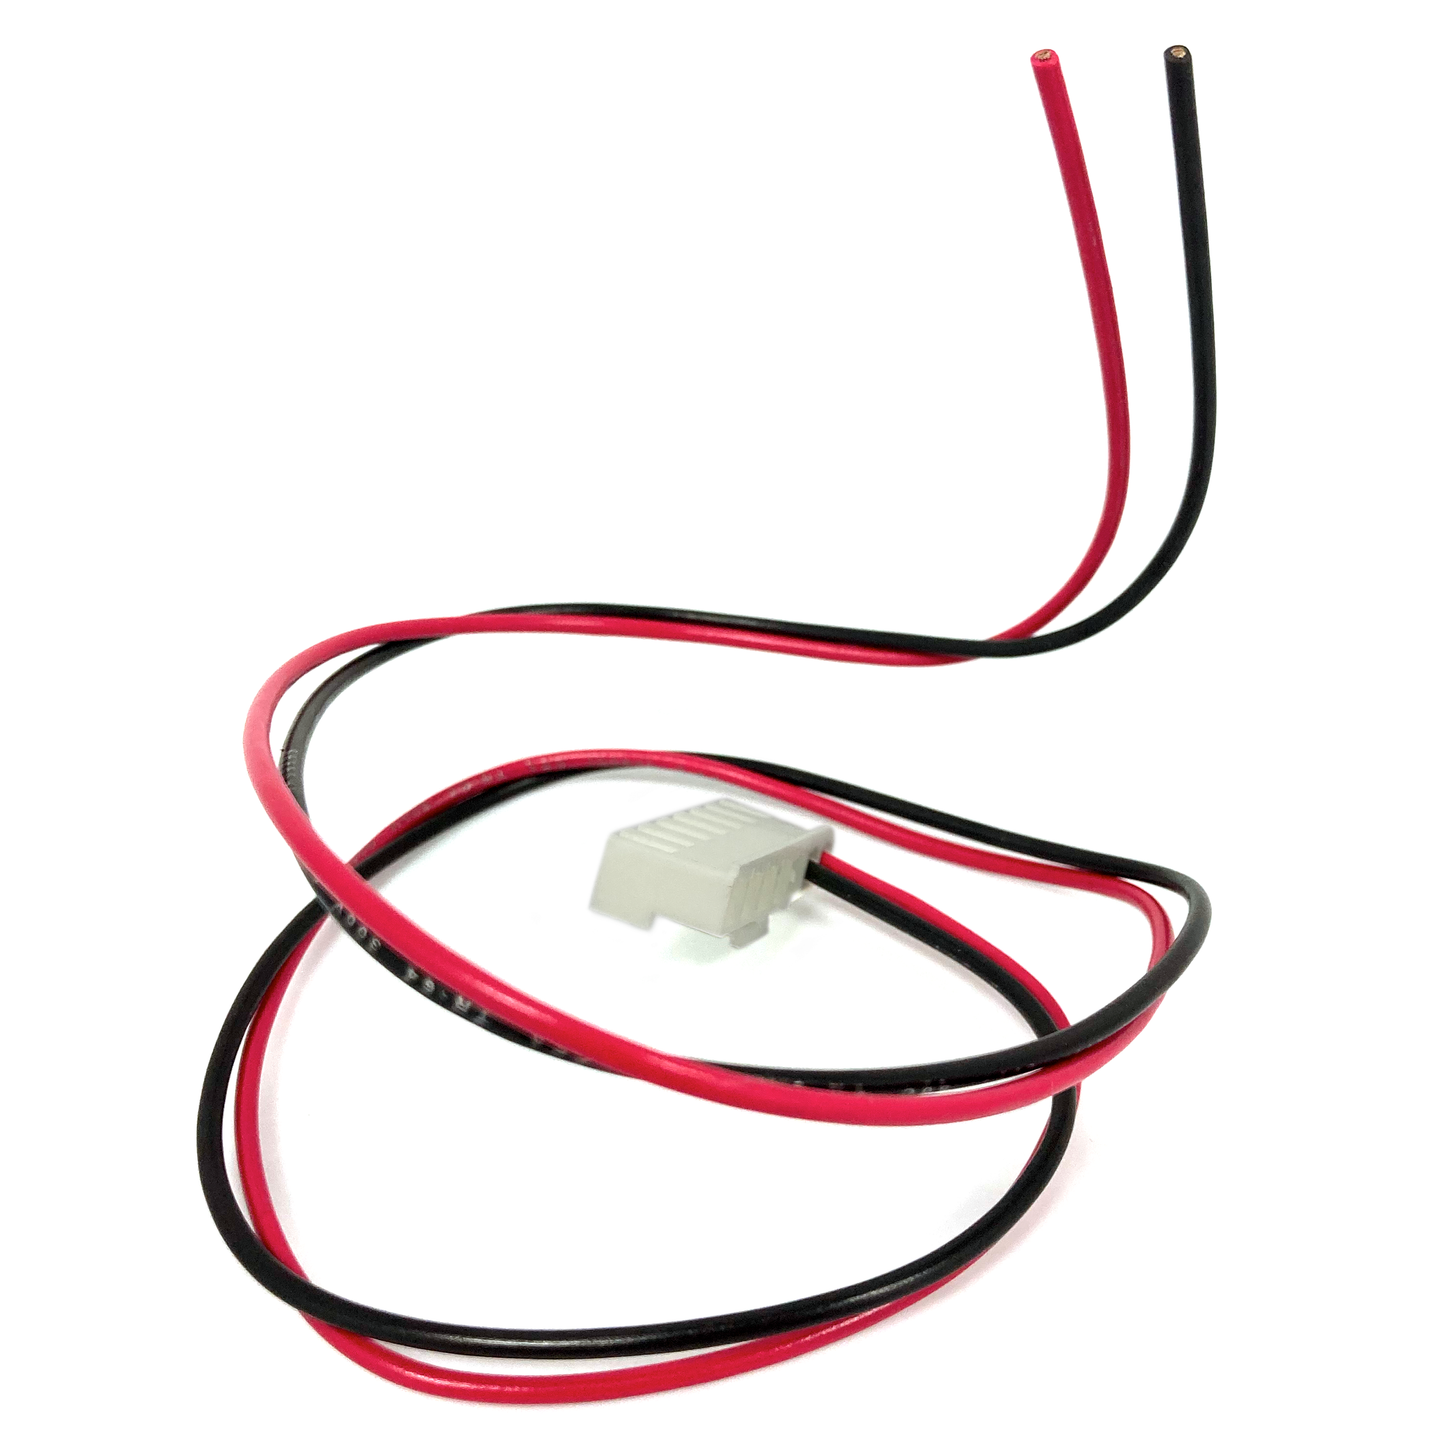 Upgrade your custom printer to a Phoenix printer by splicing the Pyramid Printer Power Cable from the custom power line to supply power to your new Phoenix Printer.